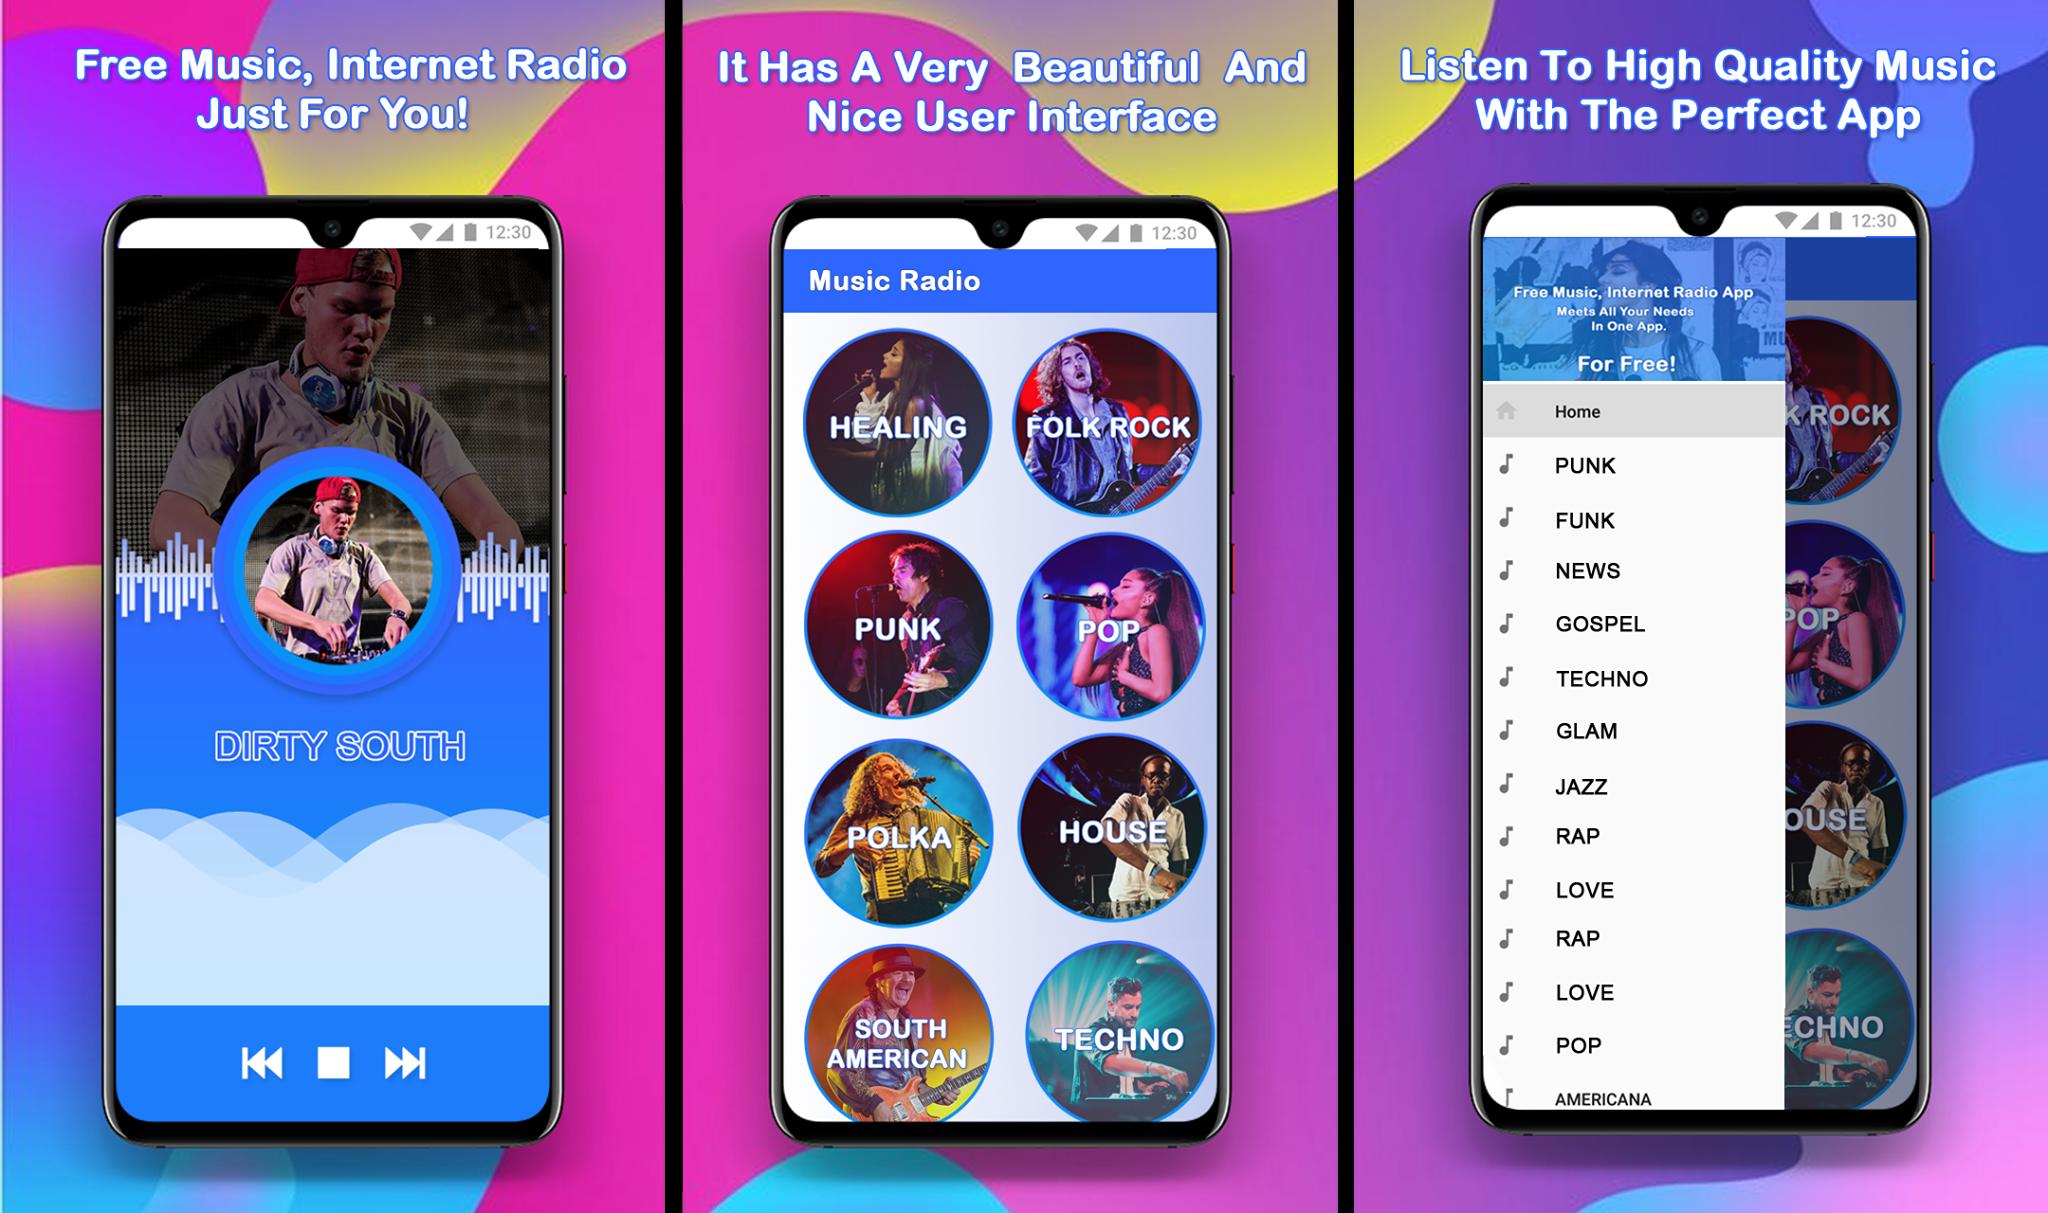 Free Pador music radio for Android - APK Download